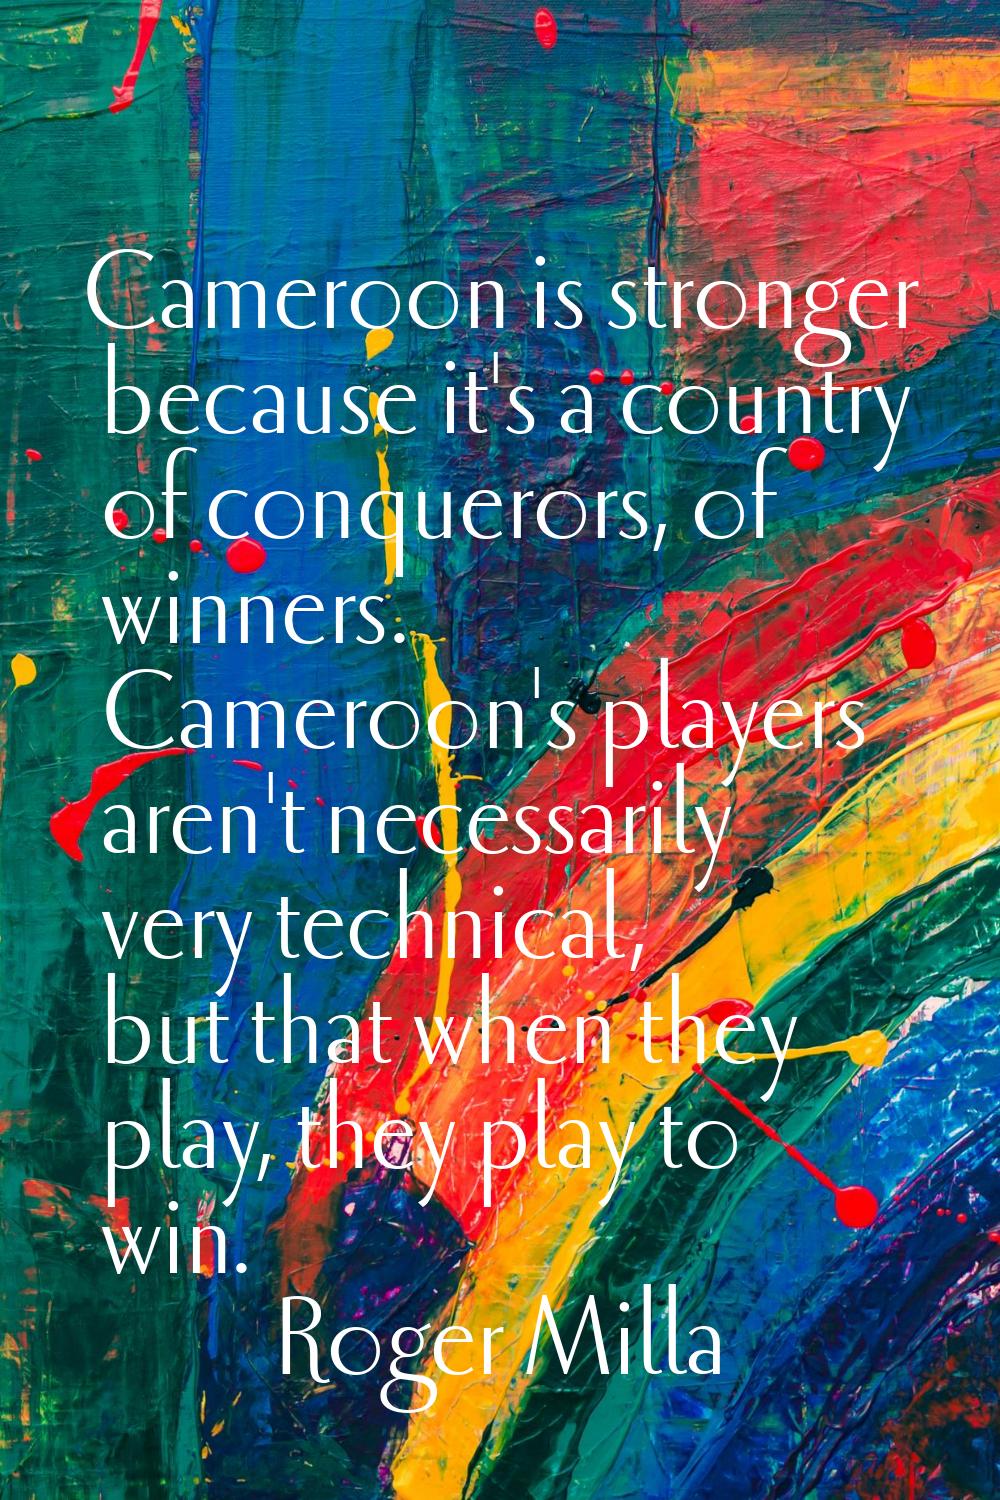 Cameroon is stronger because it's a country of conquerors, of winners. Cameroon's players aren't ne